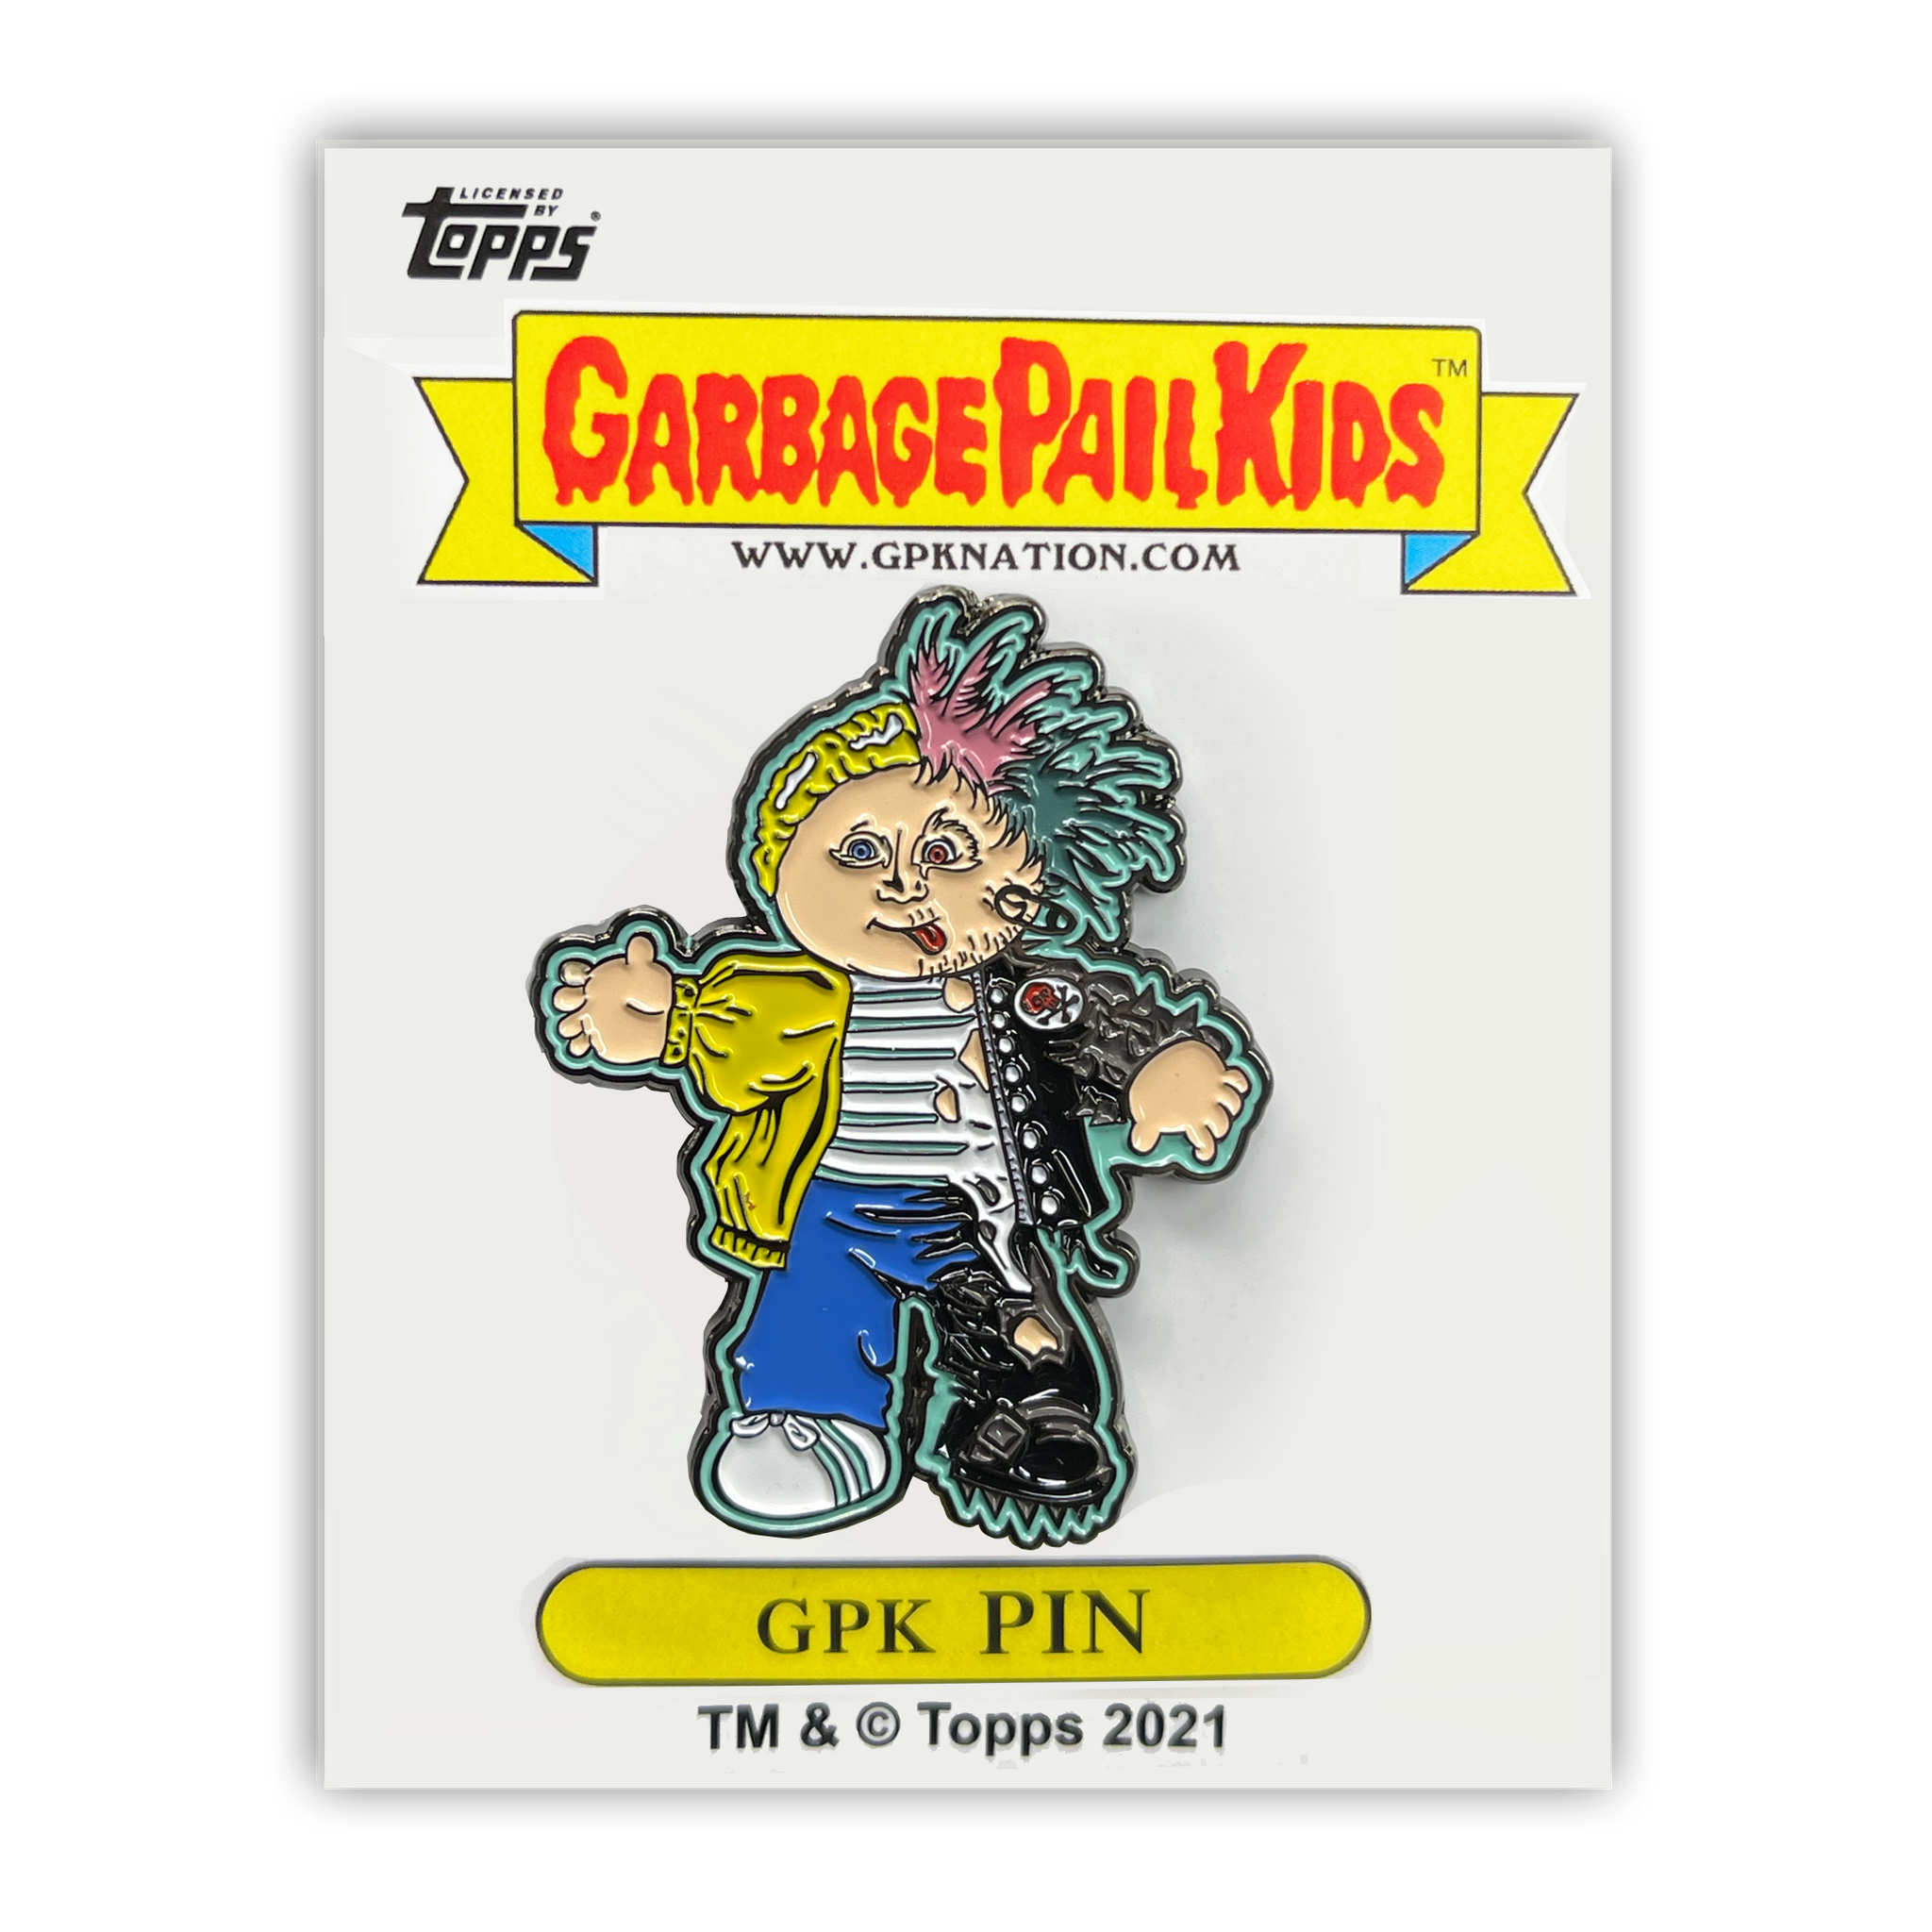 GPK-PP-009 Topps Officially Licensed GPK Split Kit / Mixed-Up Mitch Garbage Pail Kids Limited Edition pins